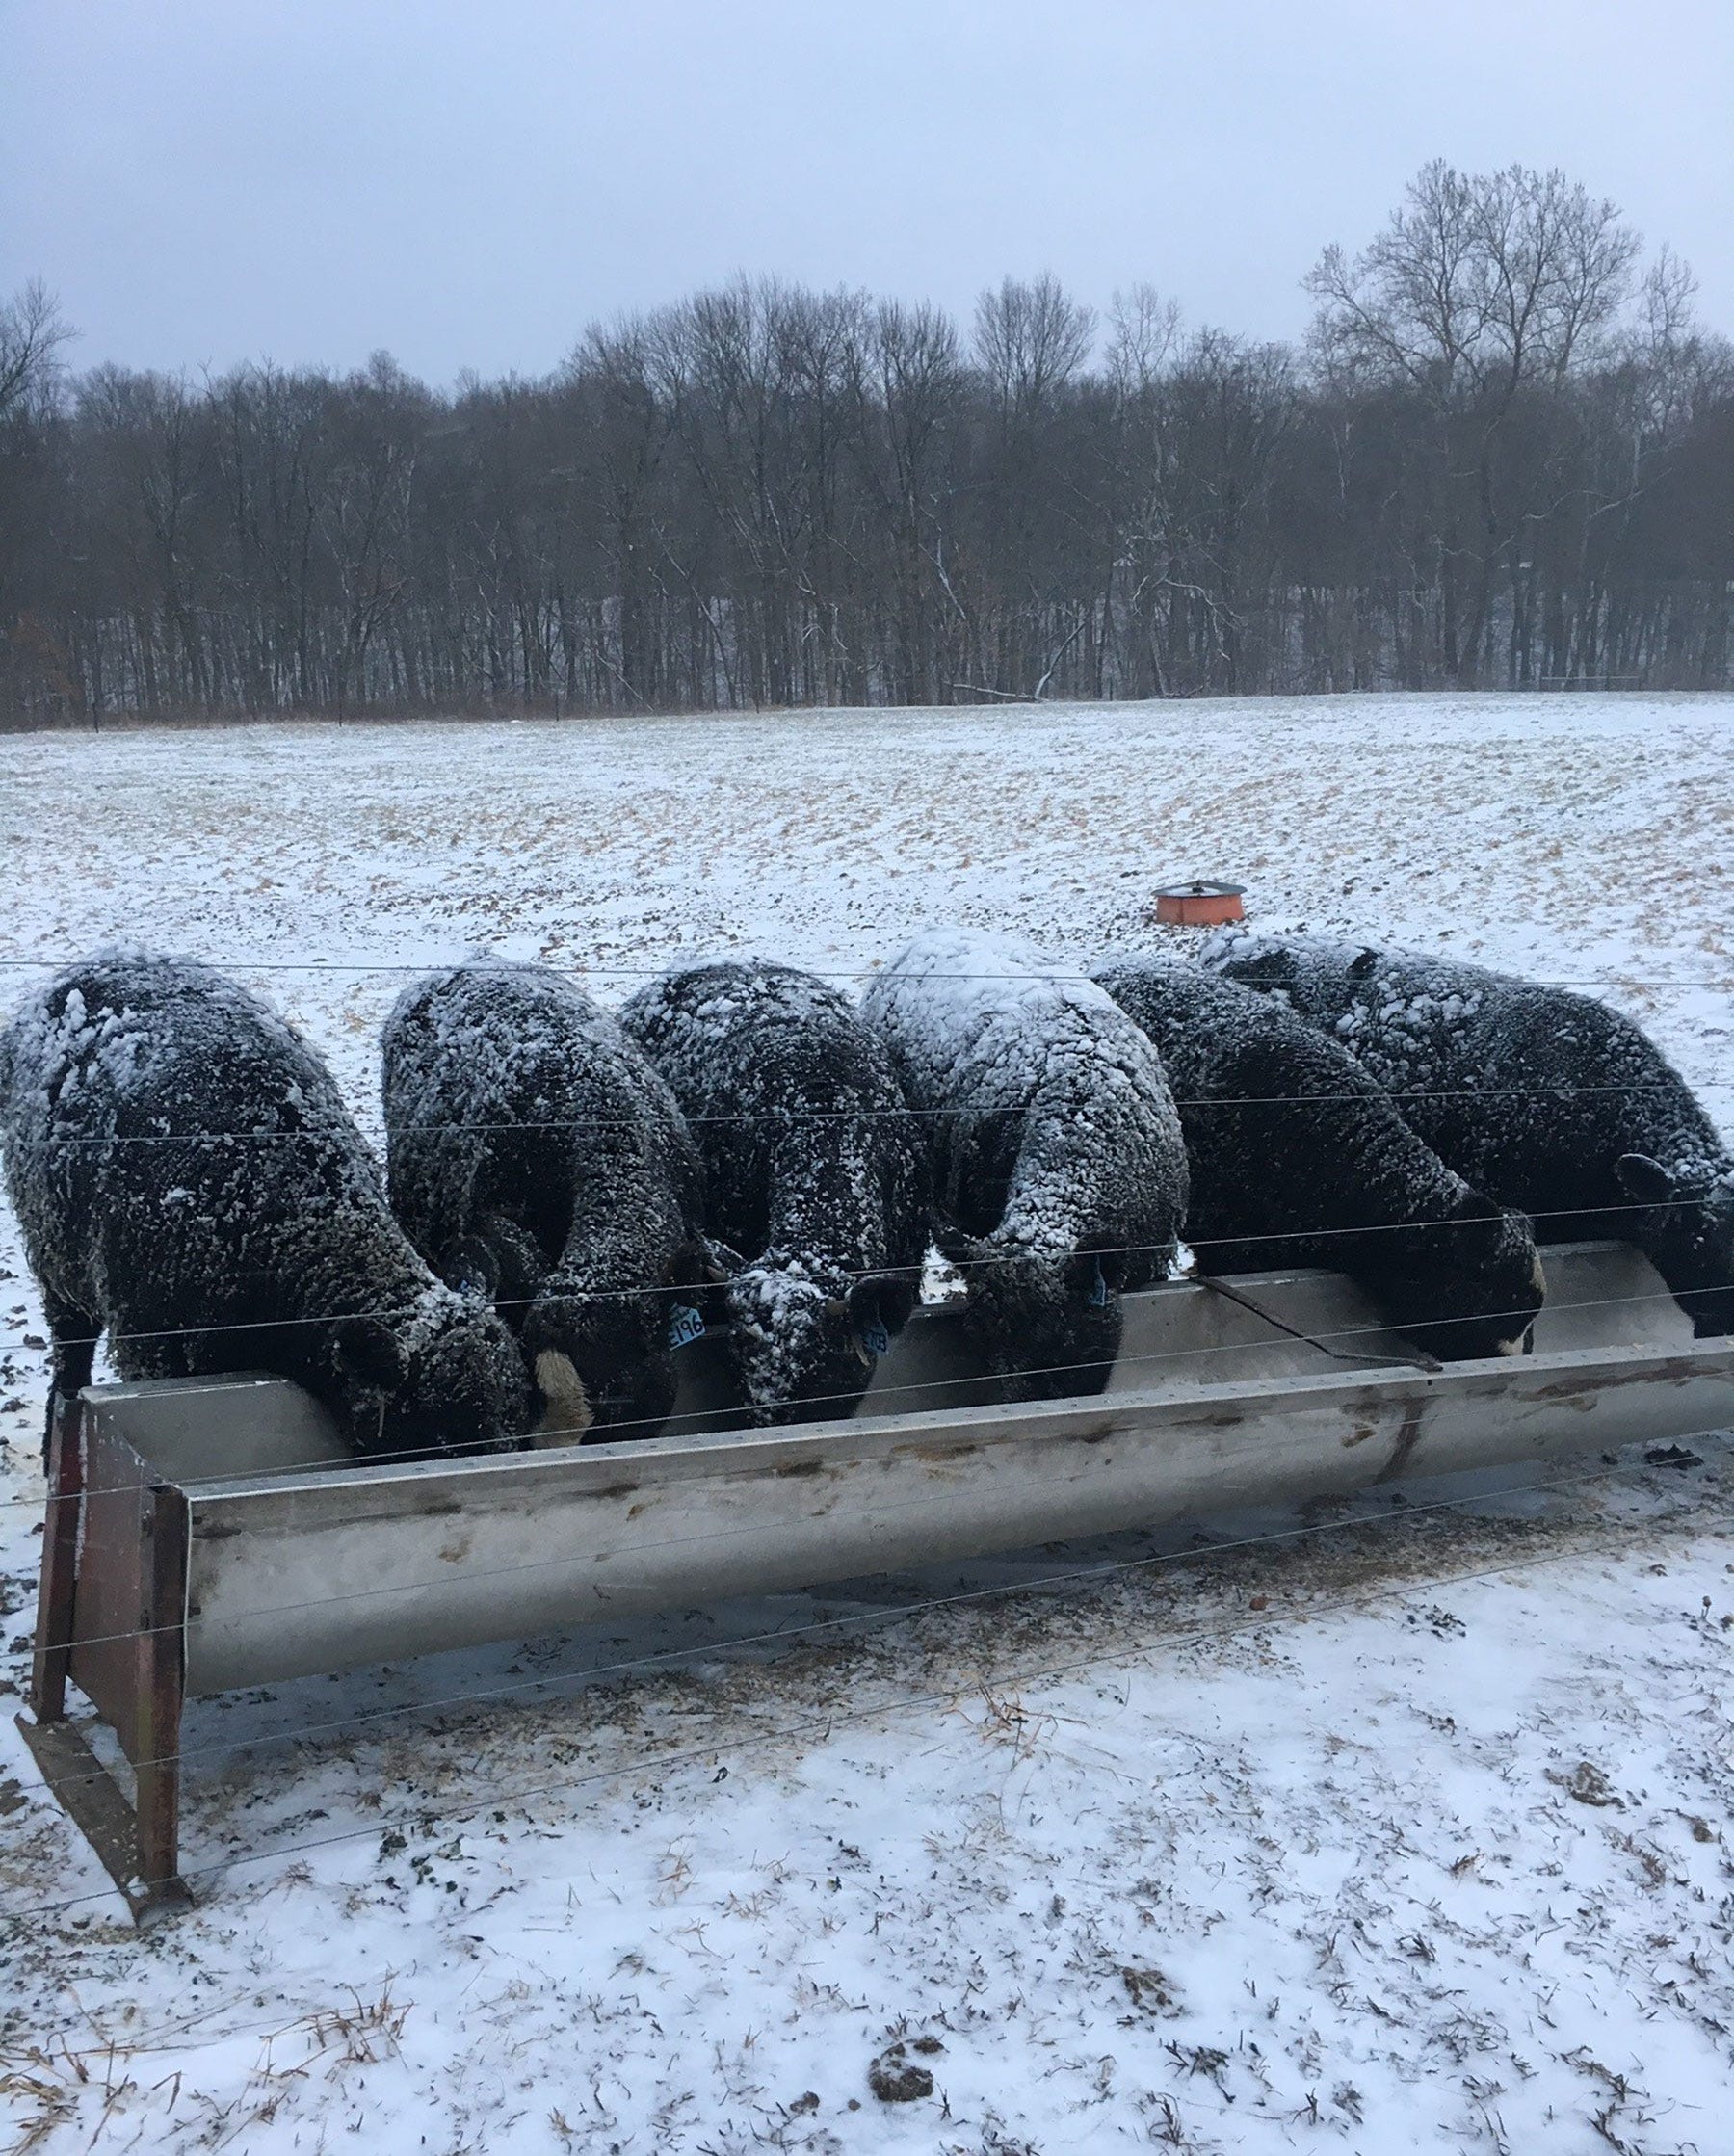 six beef cattle eat from a feed trough in a snowy pasture